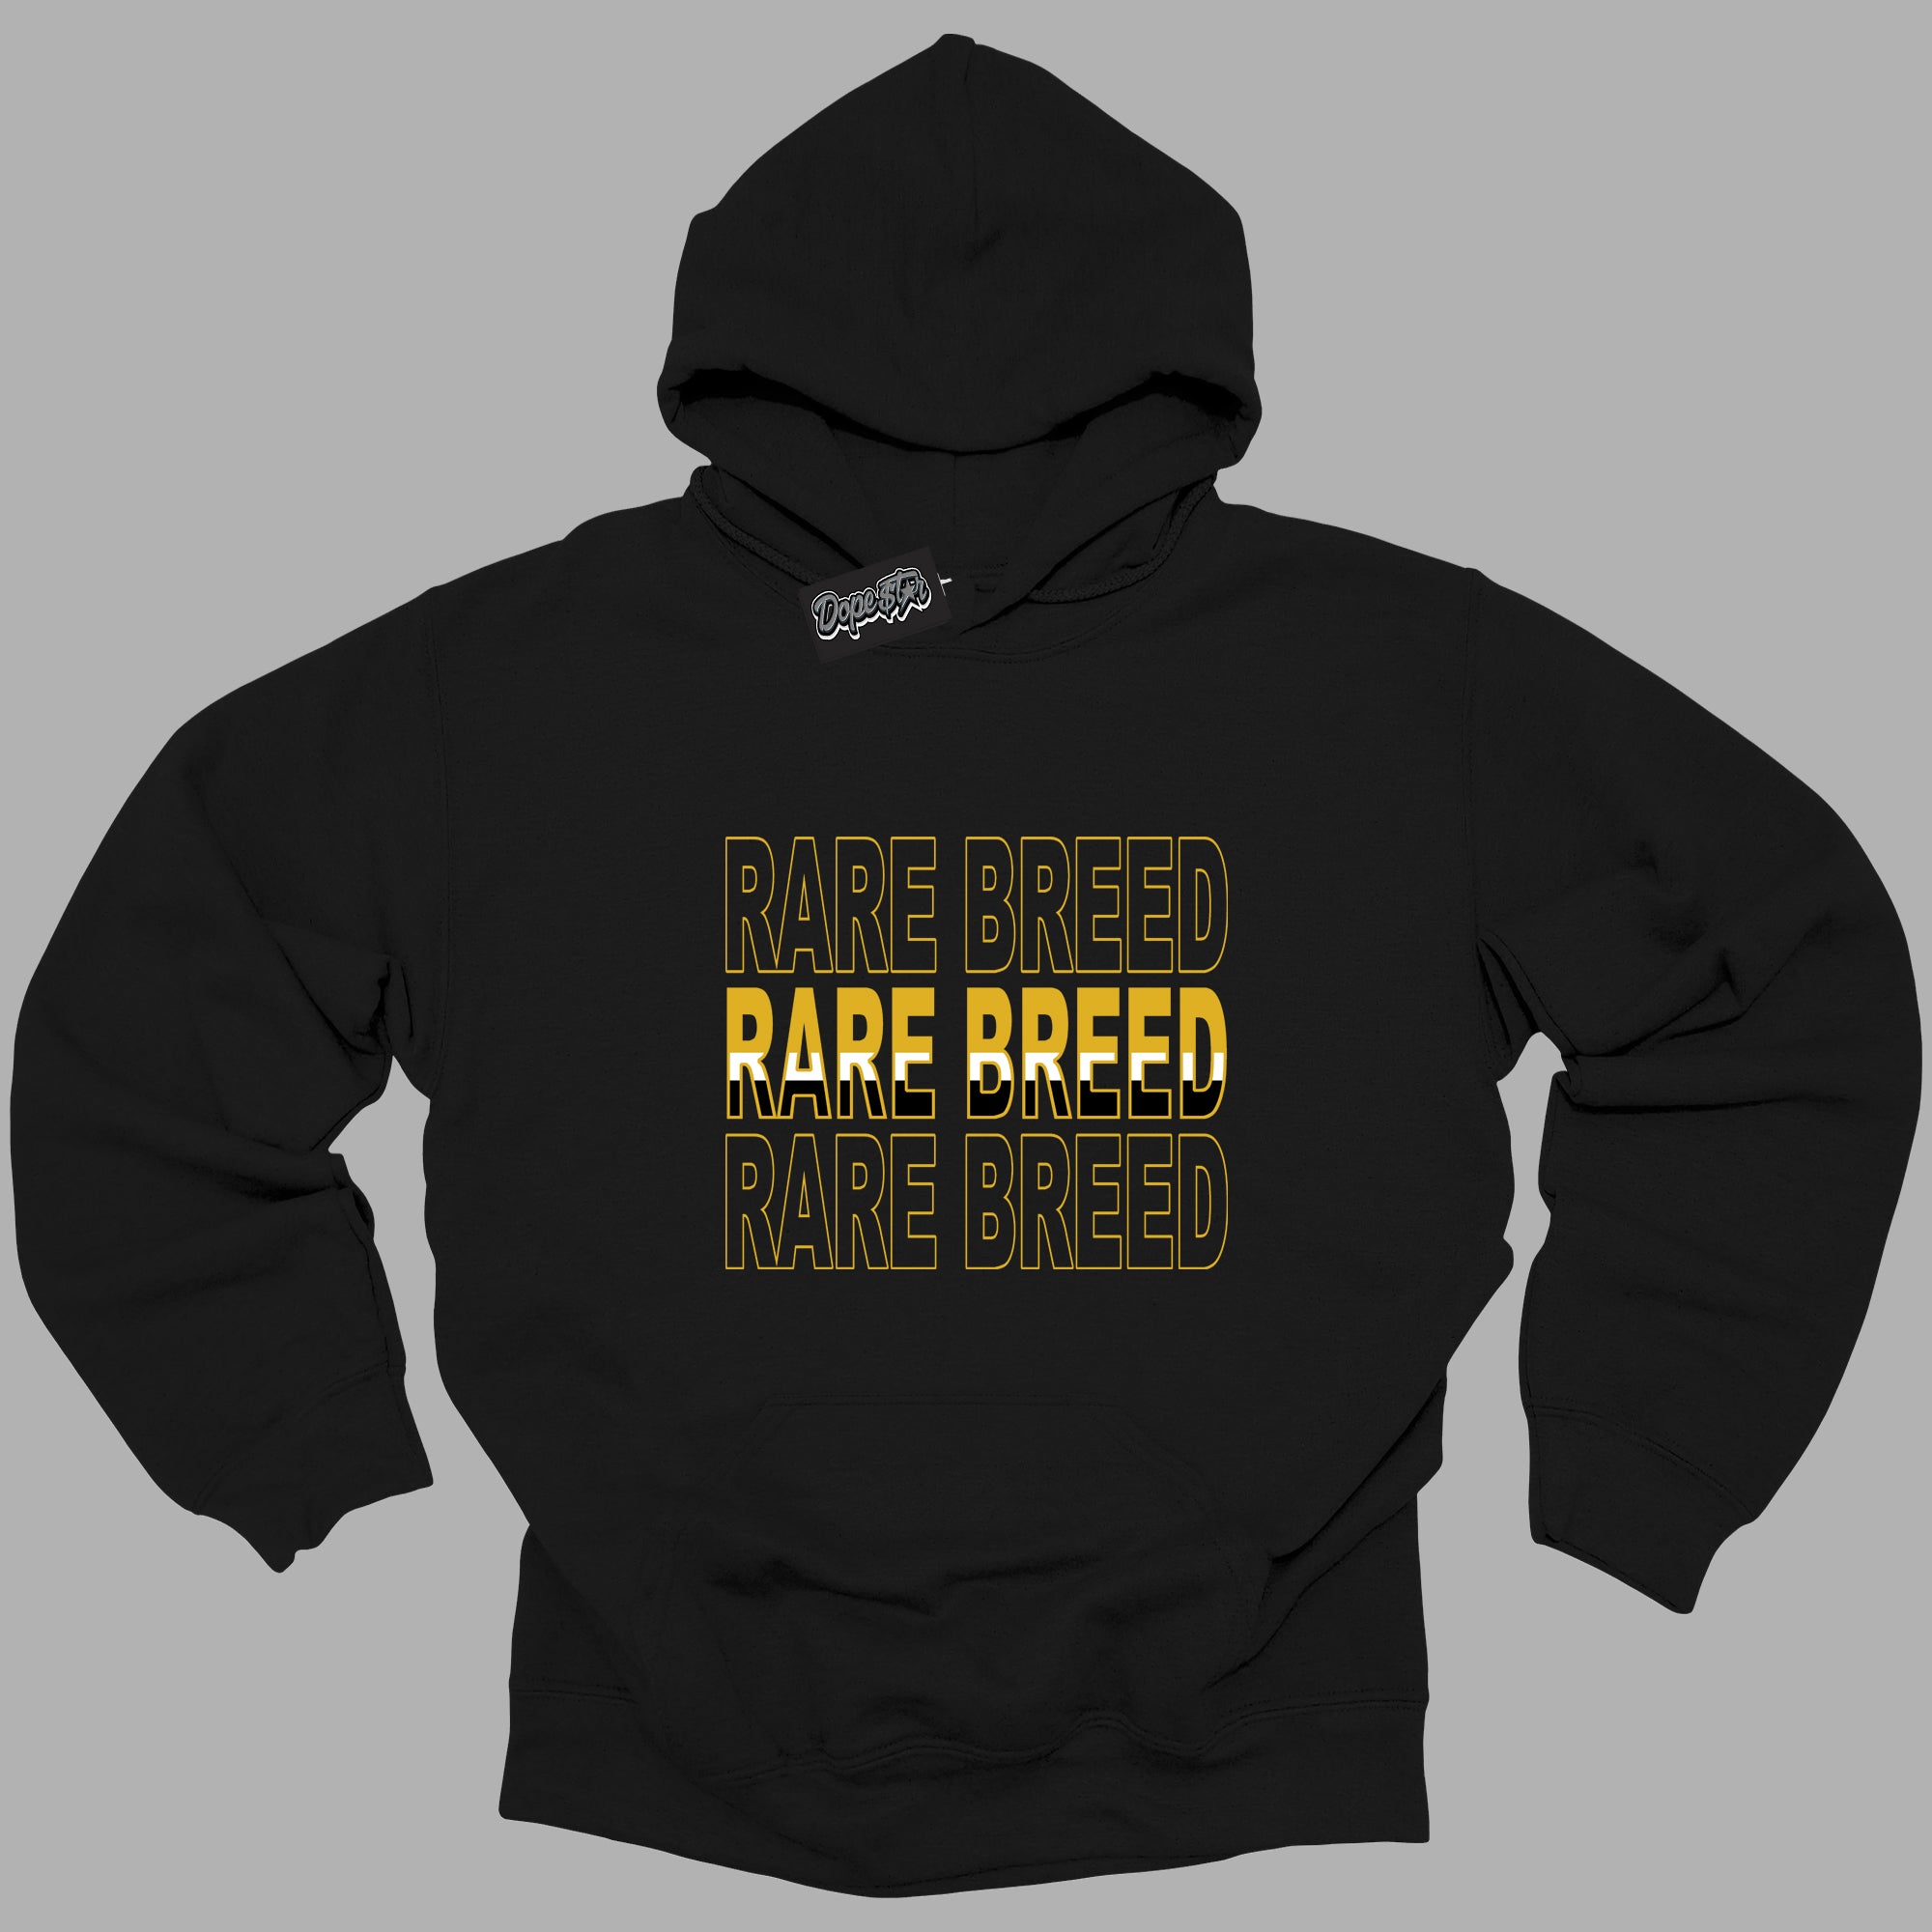 Cool Black Hoodie with “ Rare Breed ”  design that Perfectly Matches Yellow Ochre 6s Sneakers.